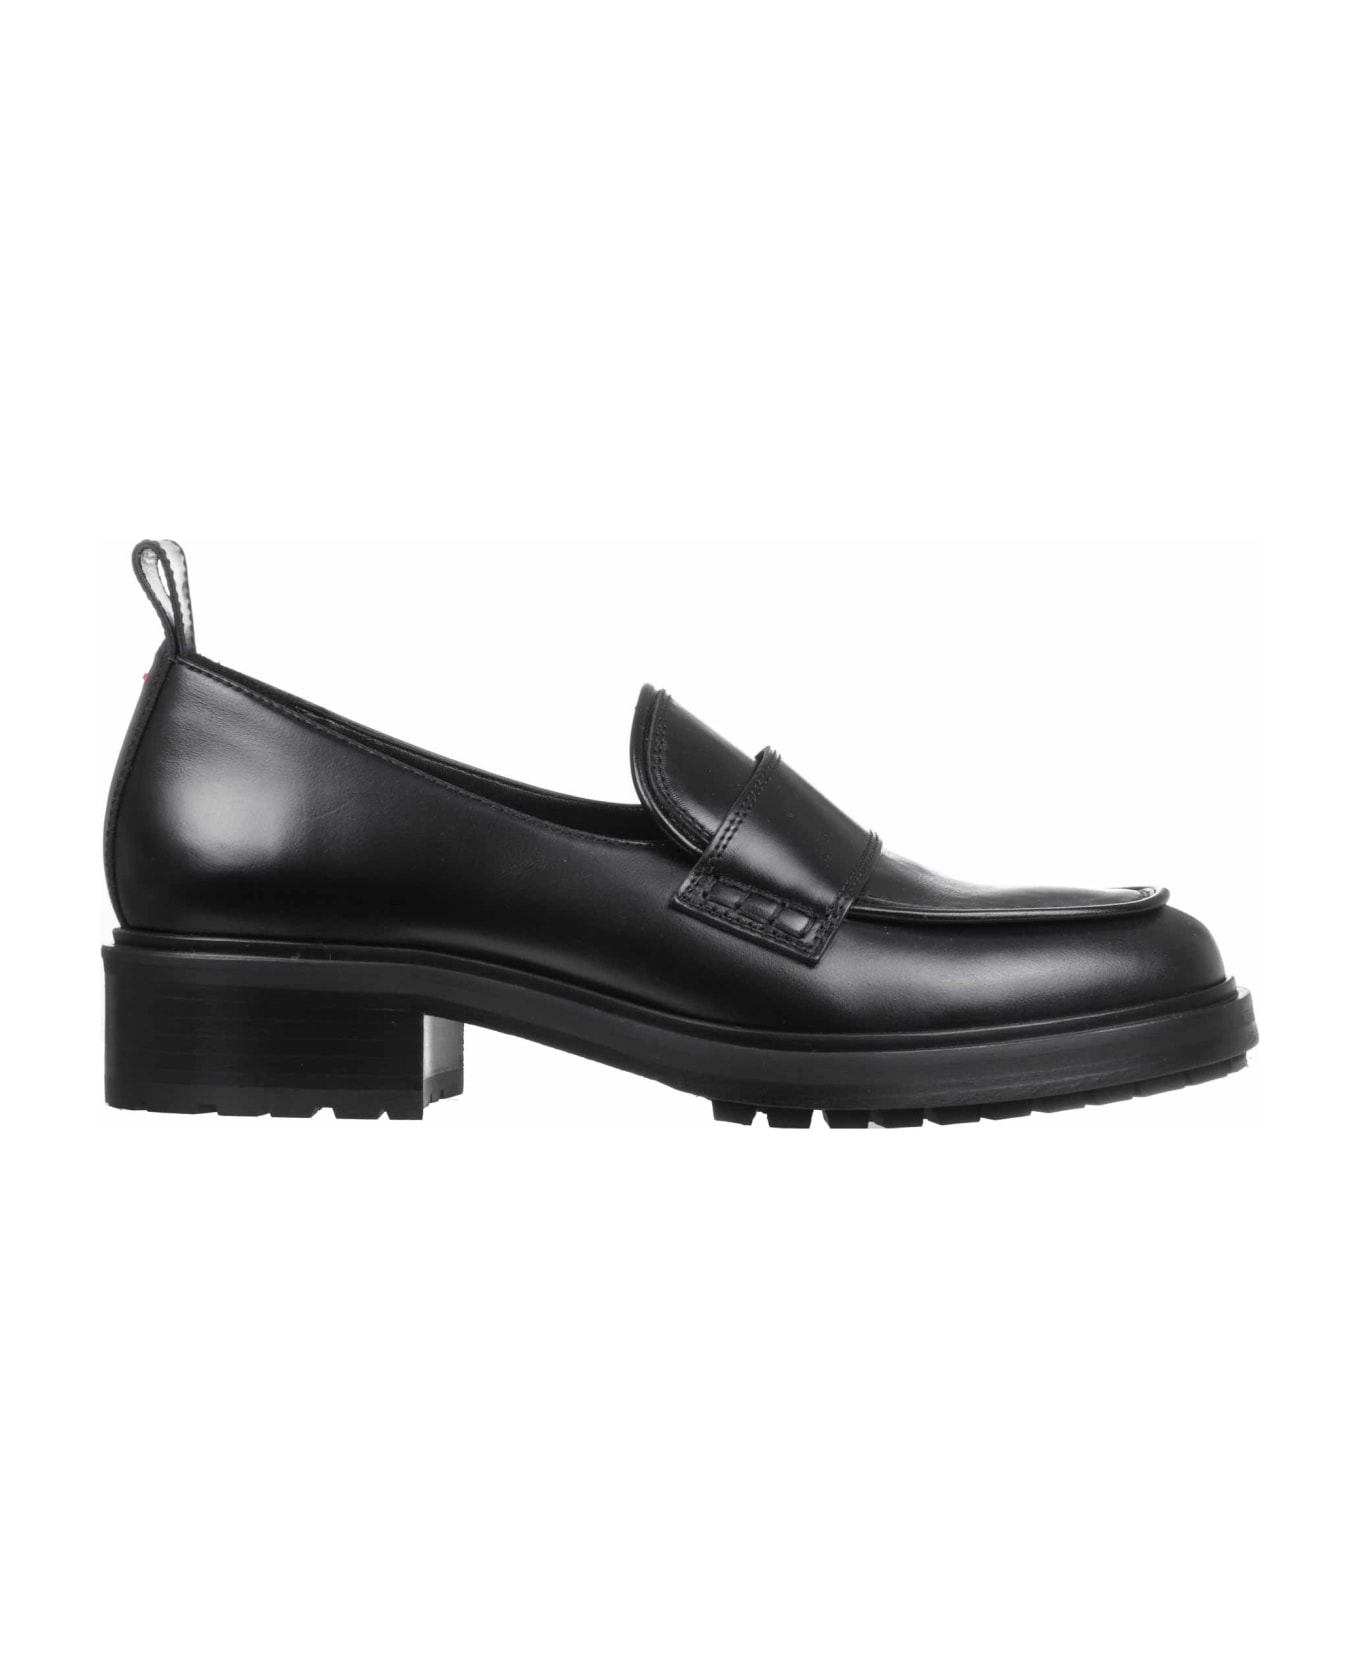 aeyde Black Ruth Loafers - Black